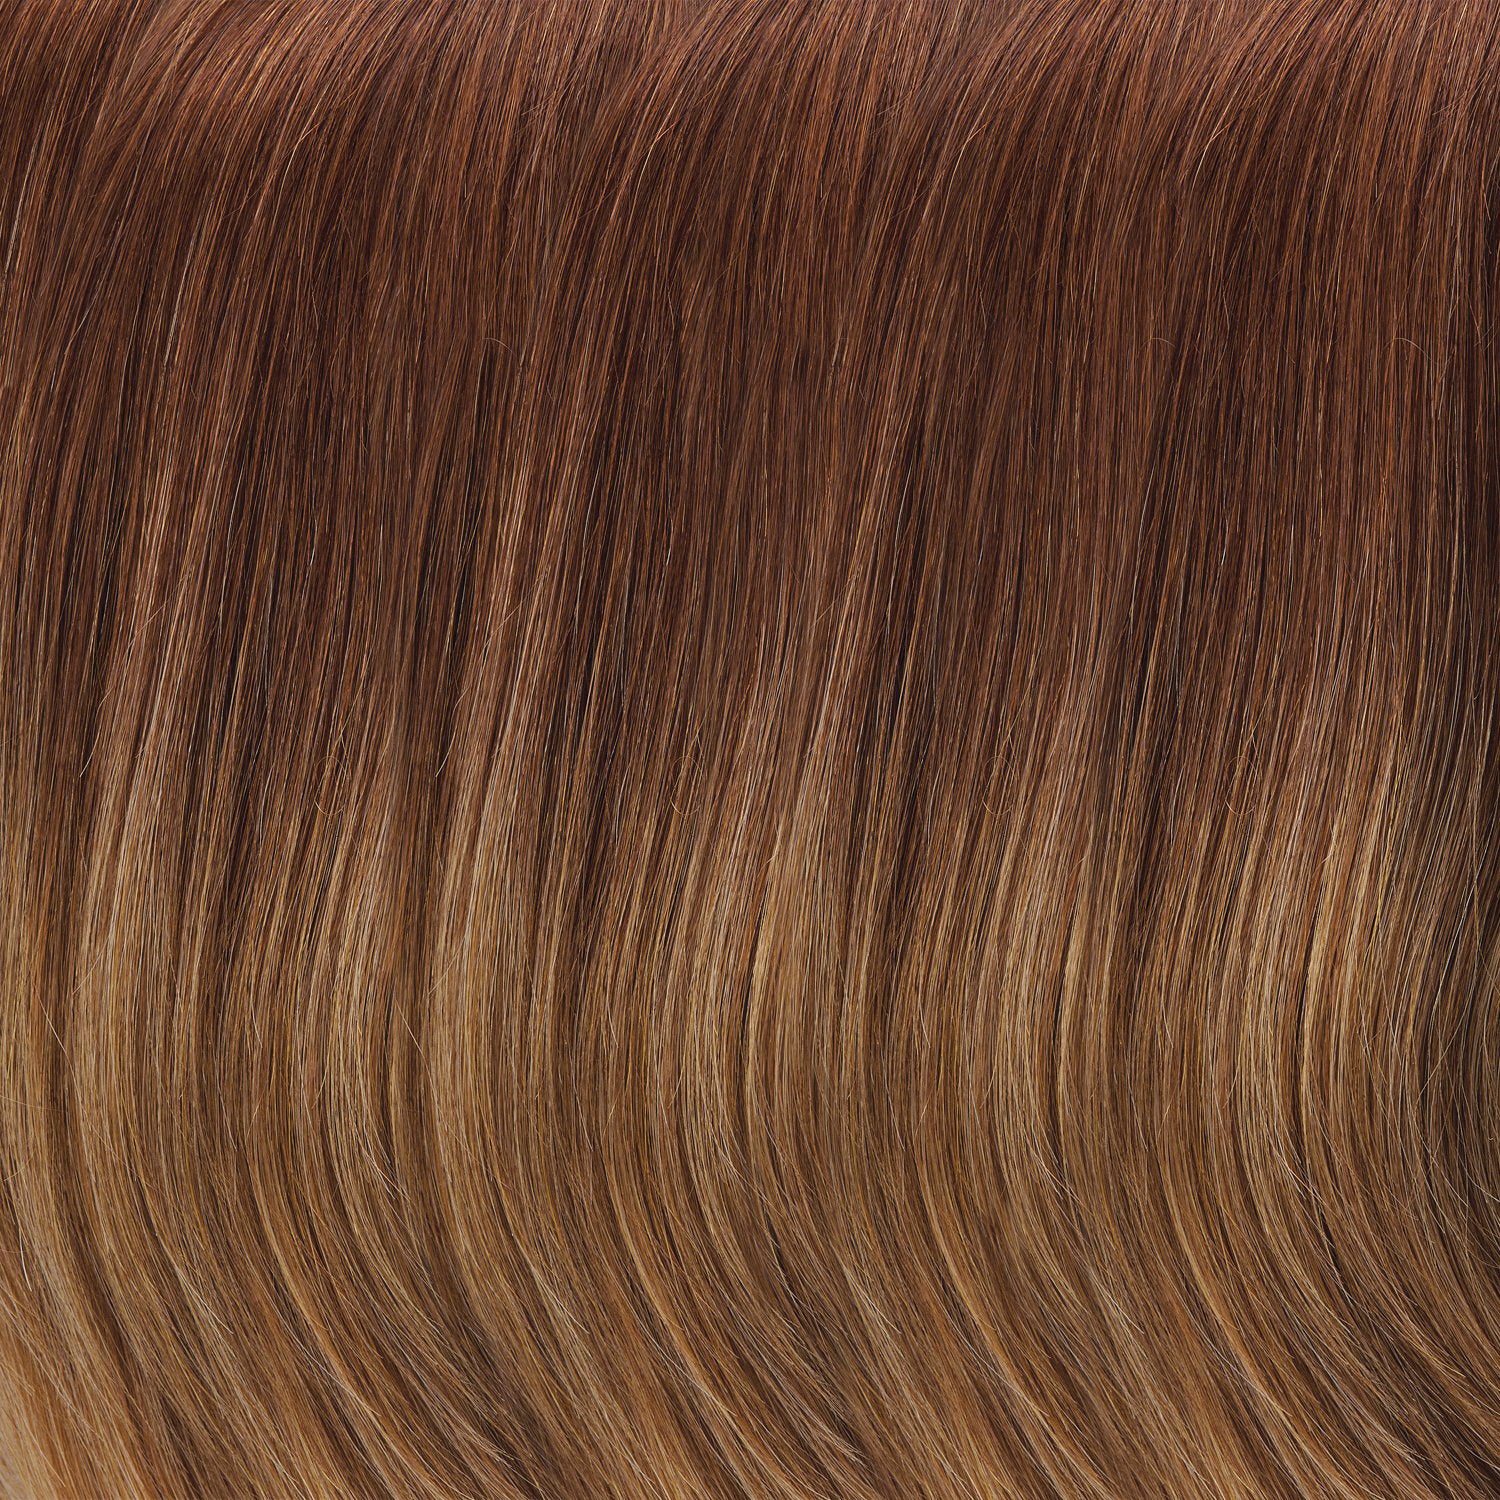 B8/30/1426 medium red-golden brown roots to midlenghts light golden blonde midlelengths to ends